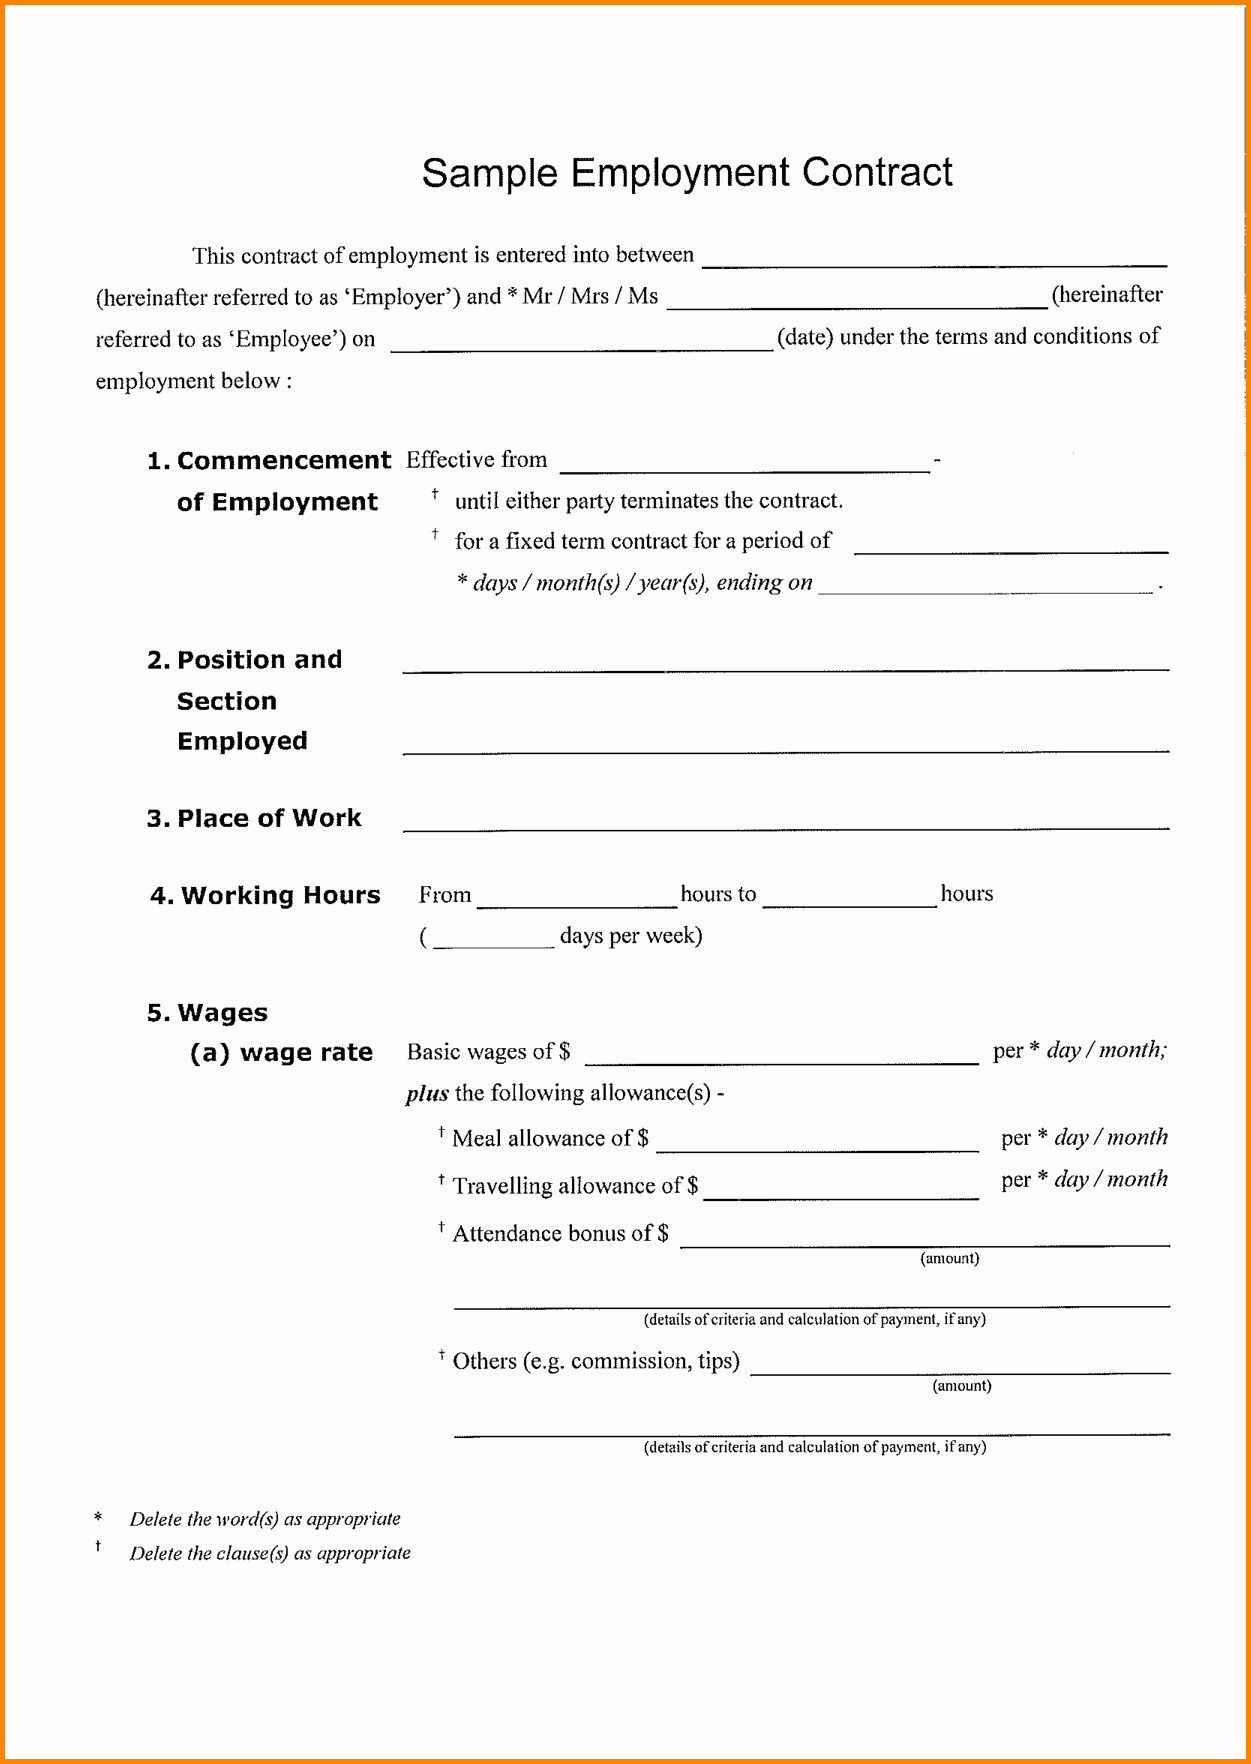 Employment Contract Template Word Unique Employment Contract Template Word Portablegasgrillweber